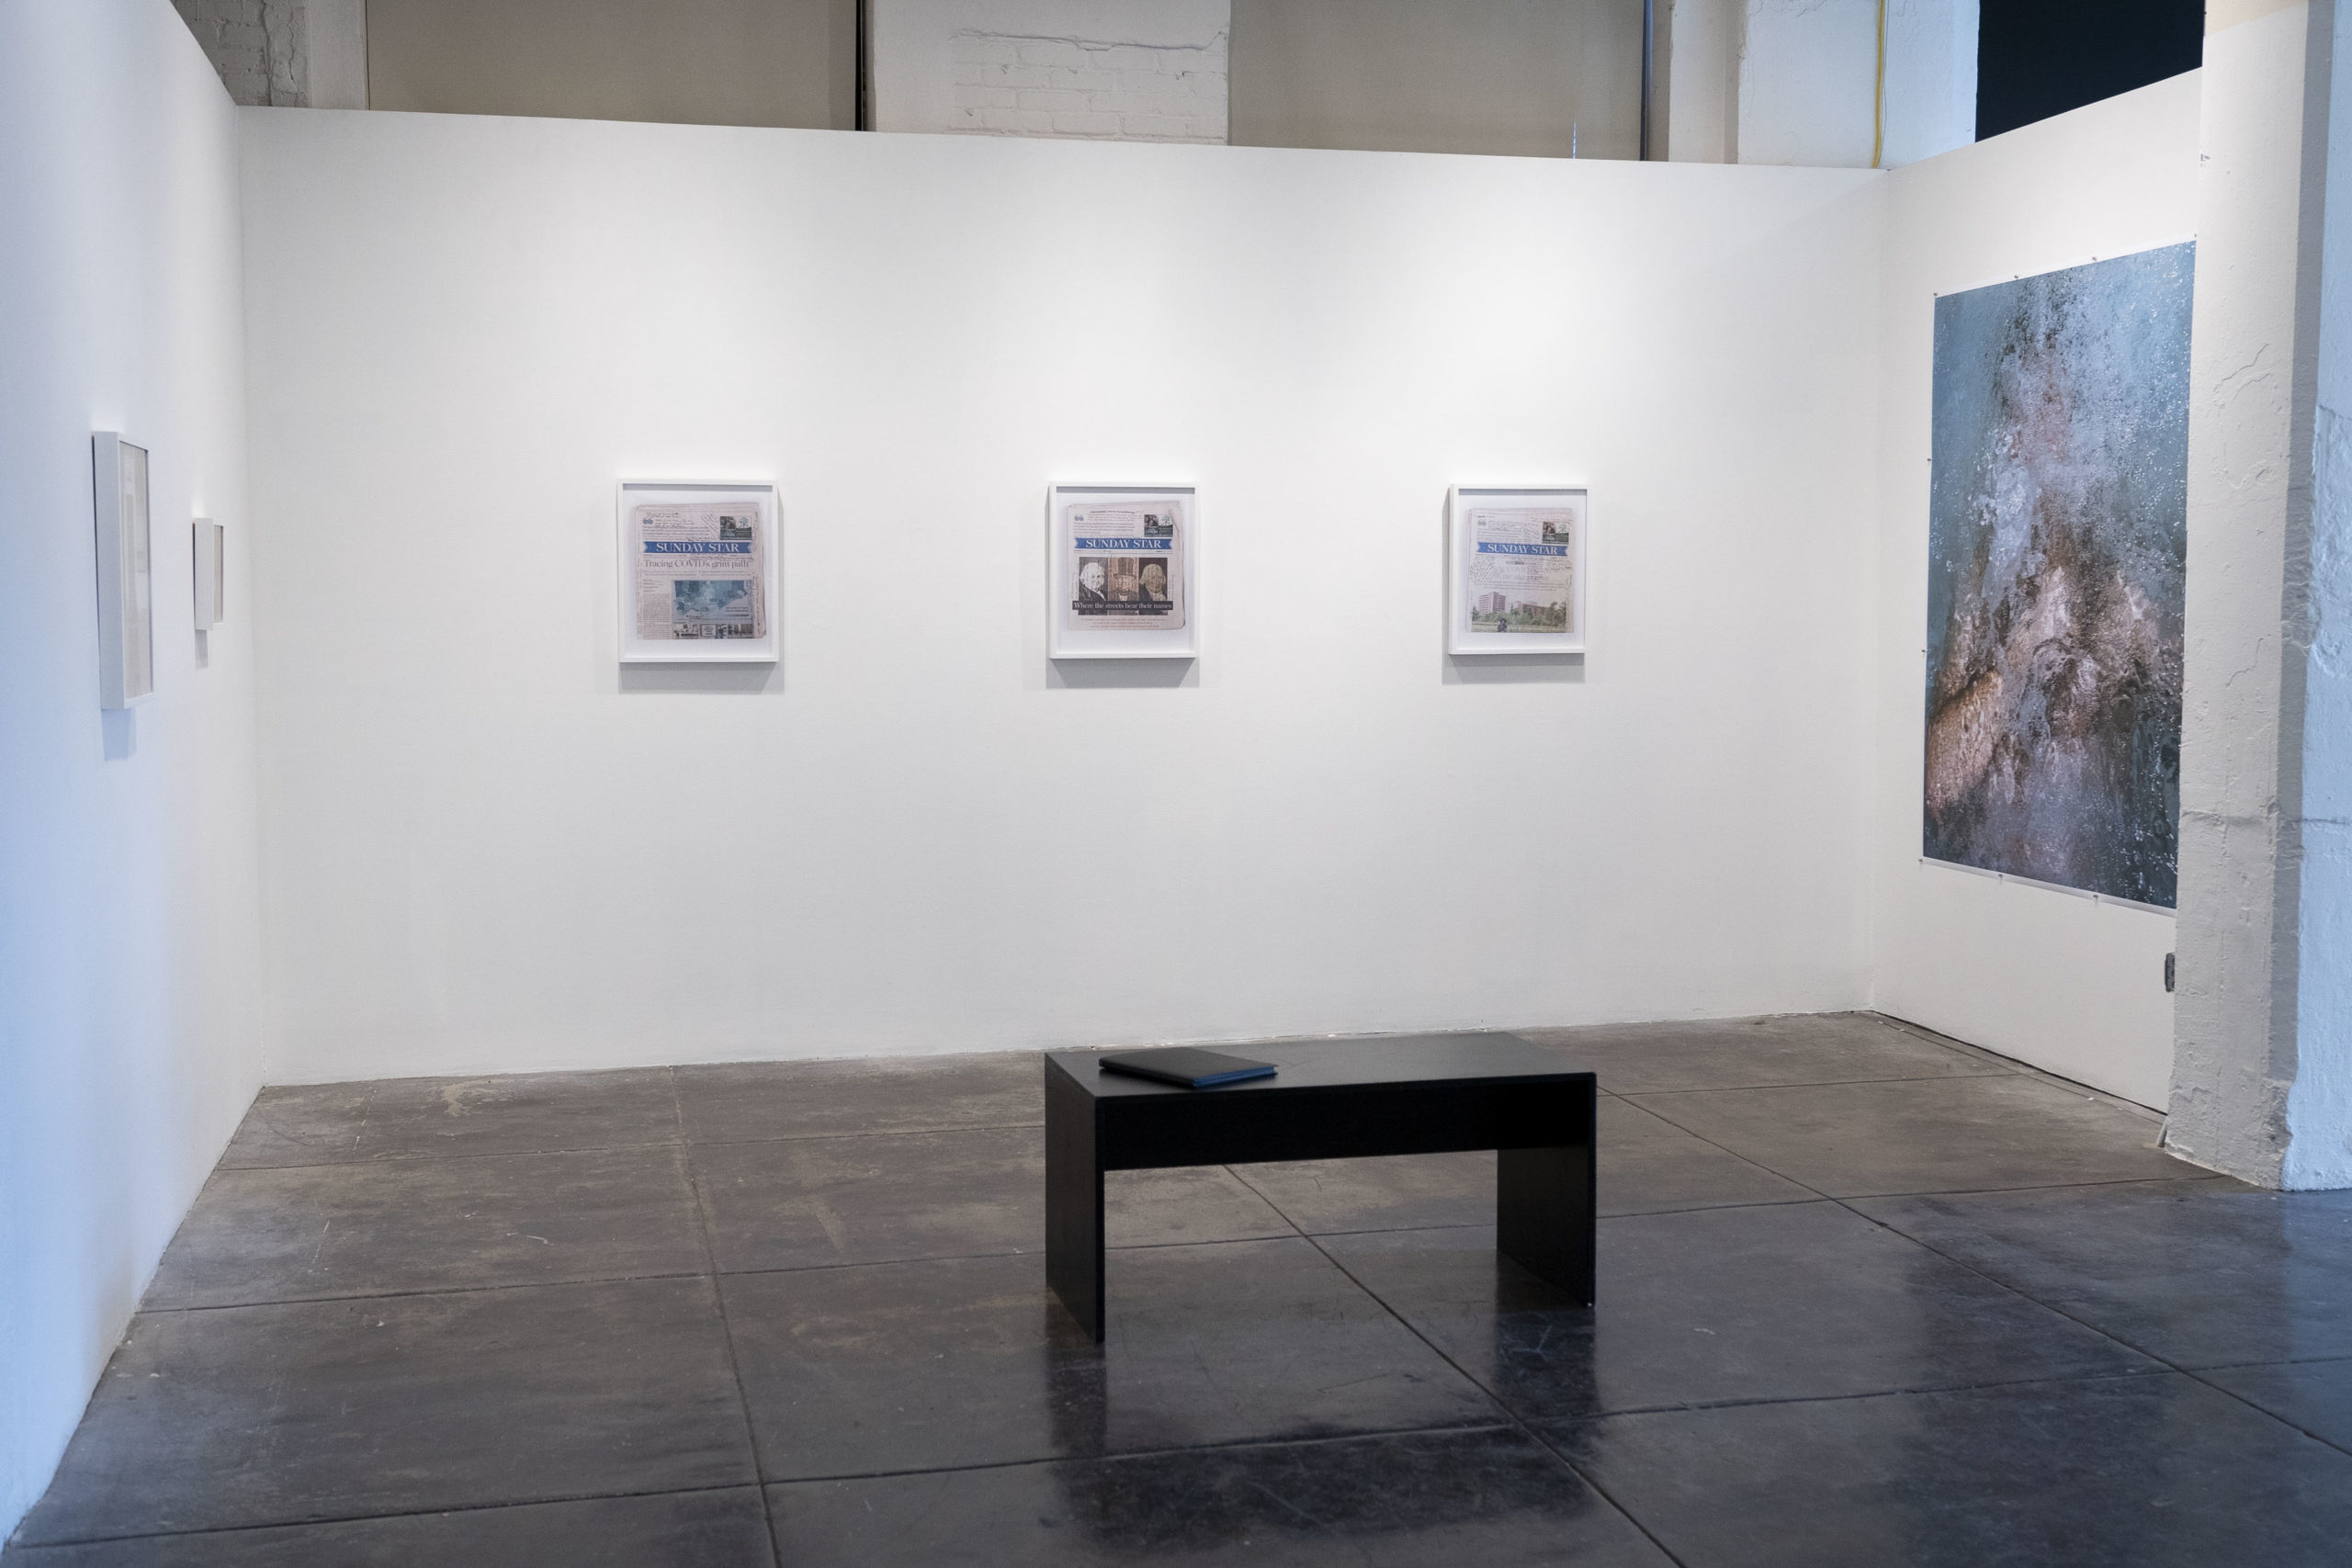 An image of the exhibition installed at TILT Institute